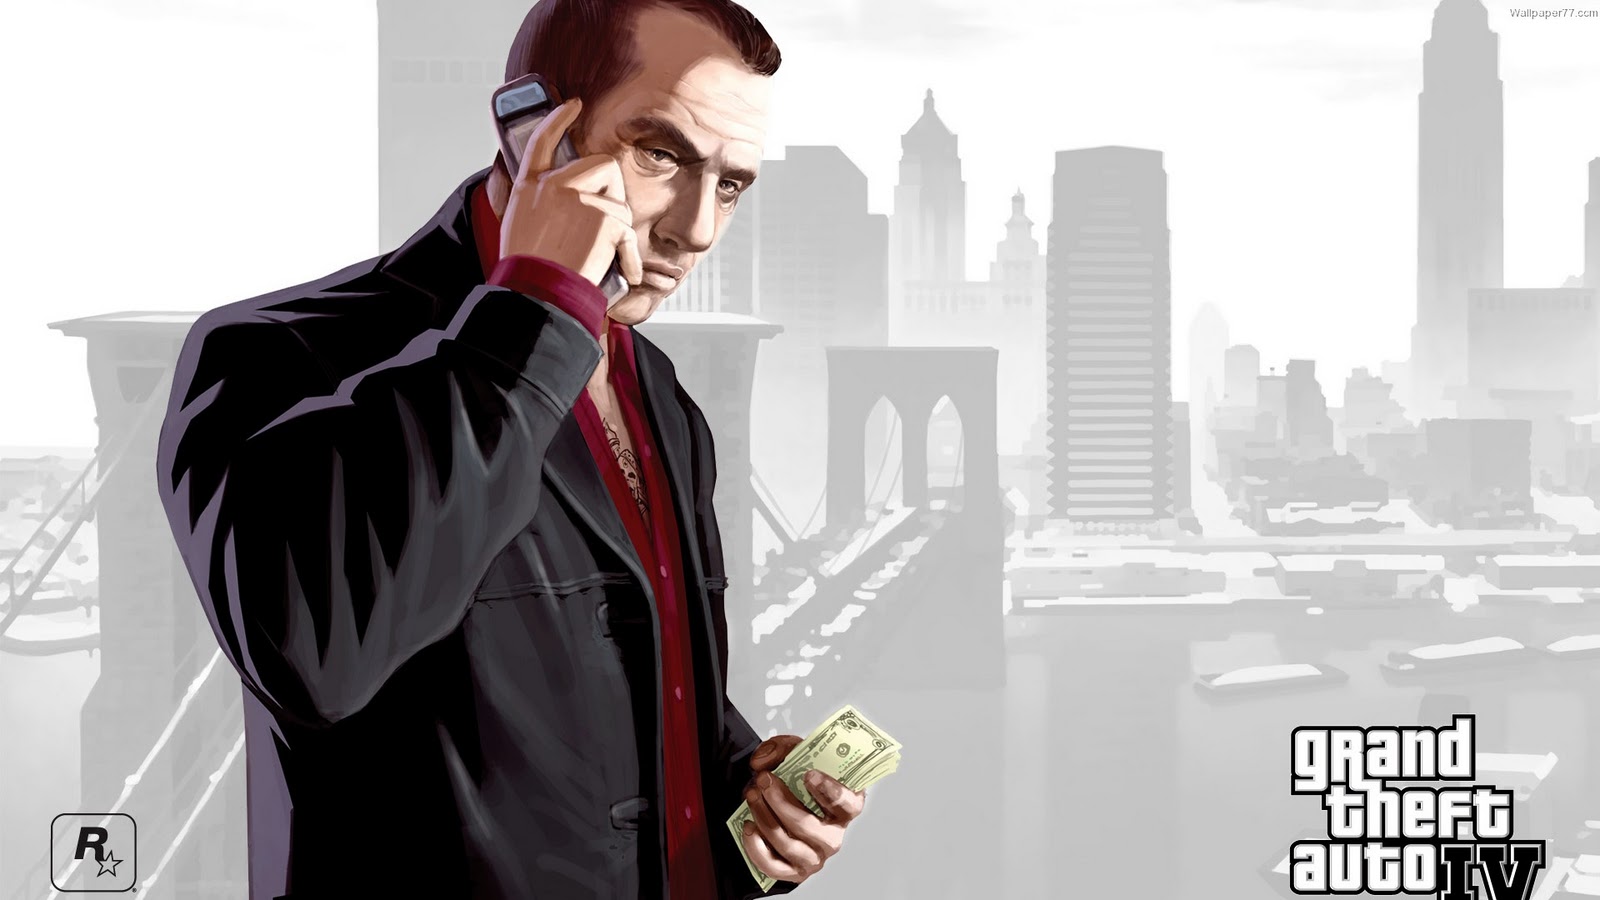 Free Download Gta 4 Wallpaper 1080p See To World 1600x900 For Images, Photos, Reviews